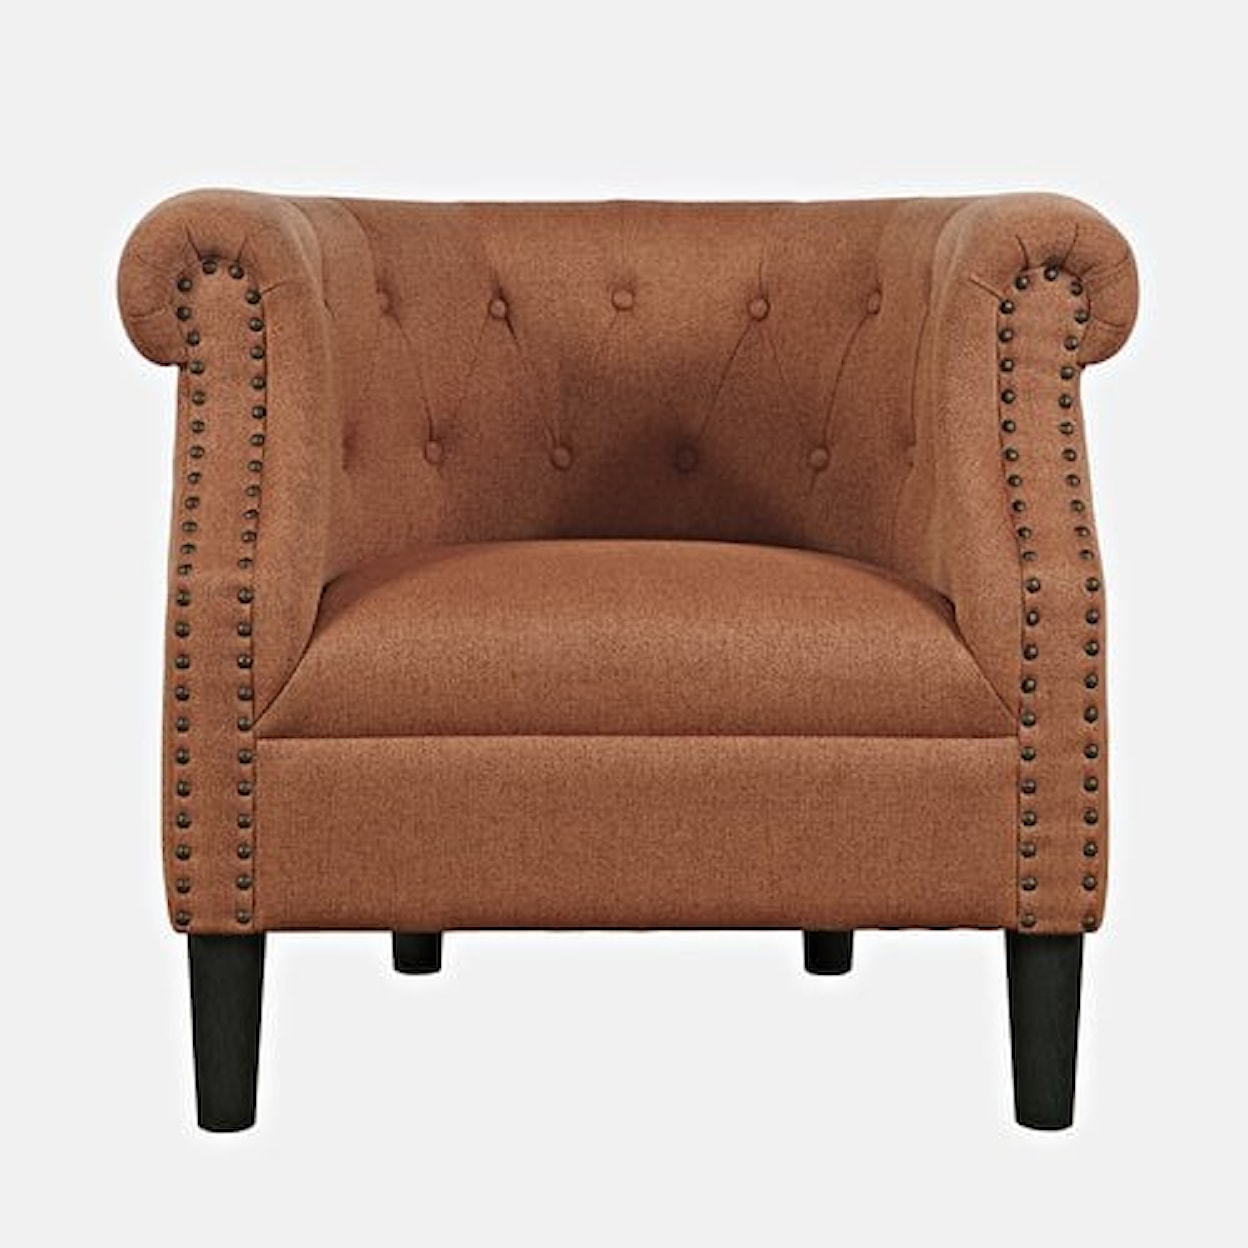 Jofran Lily Accent Chair - Spice